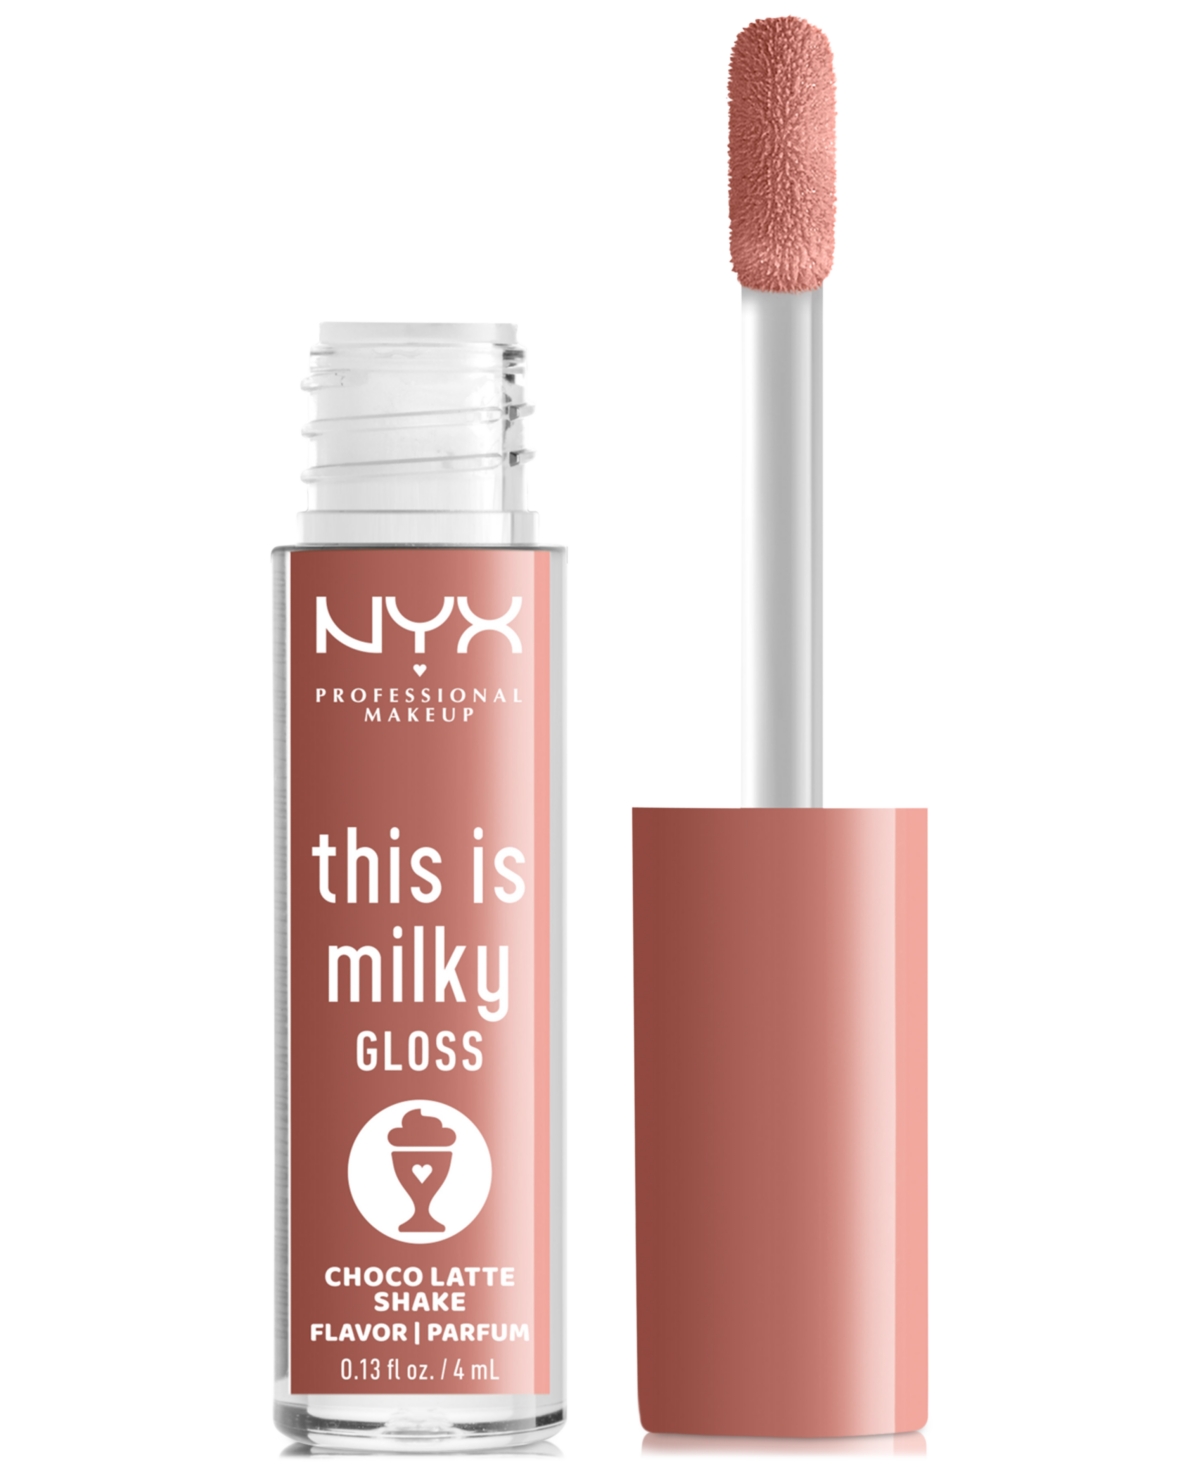 Nyx Professional Makeup This Is Milky Gloss In Choco Latte Shake